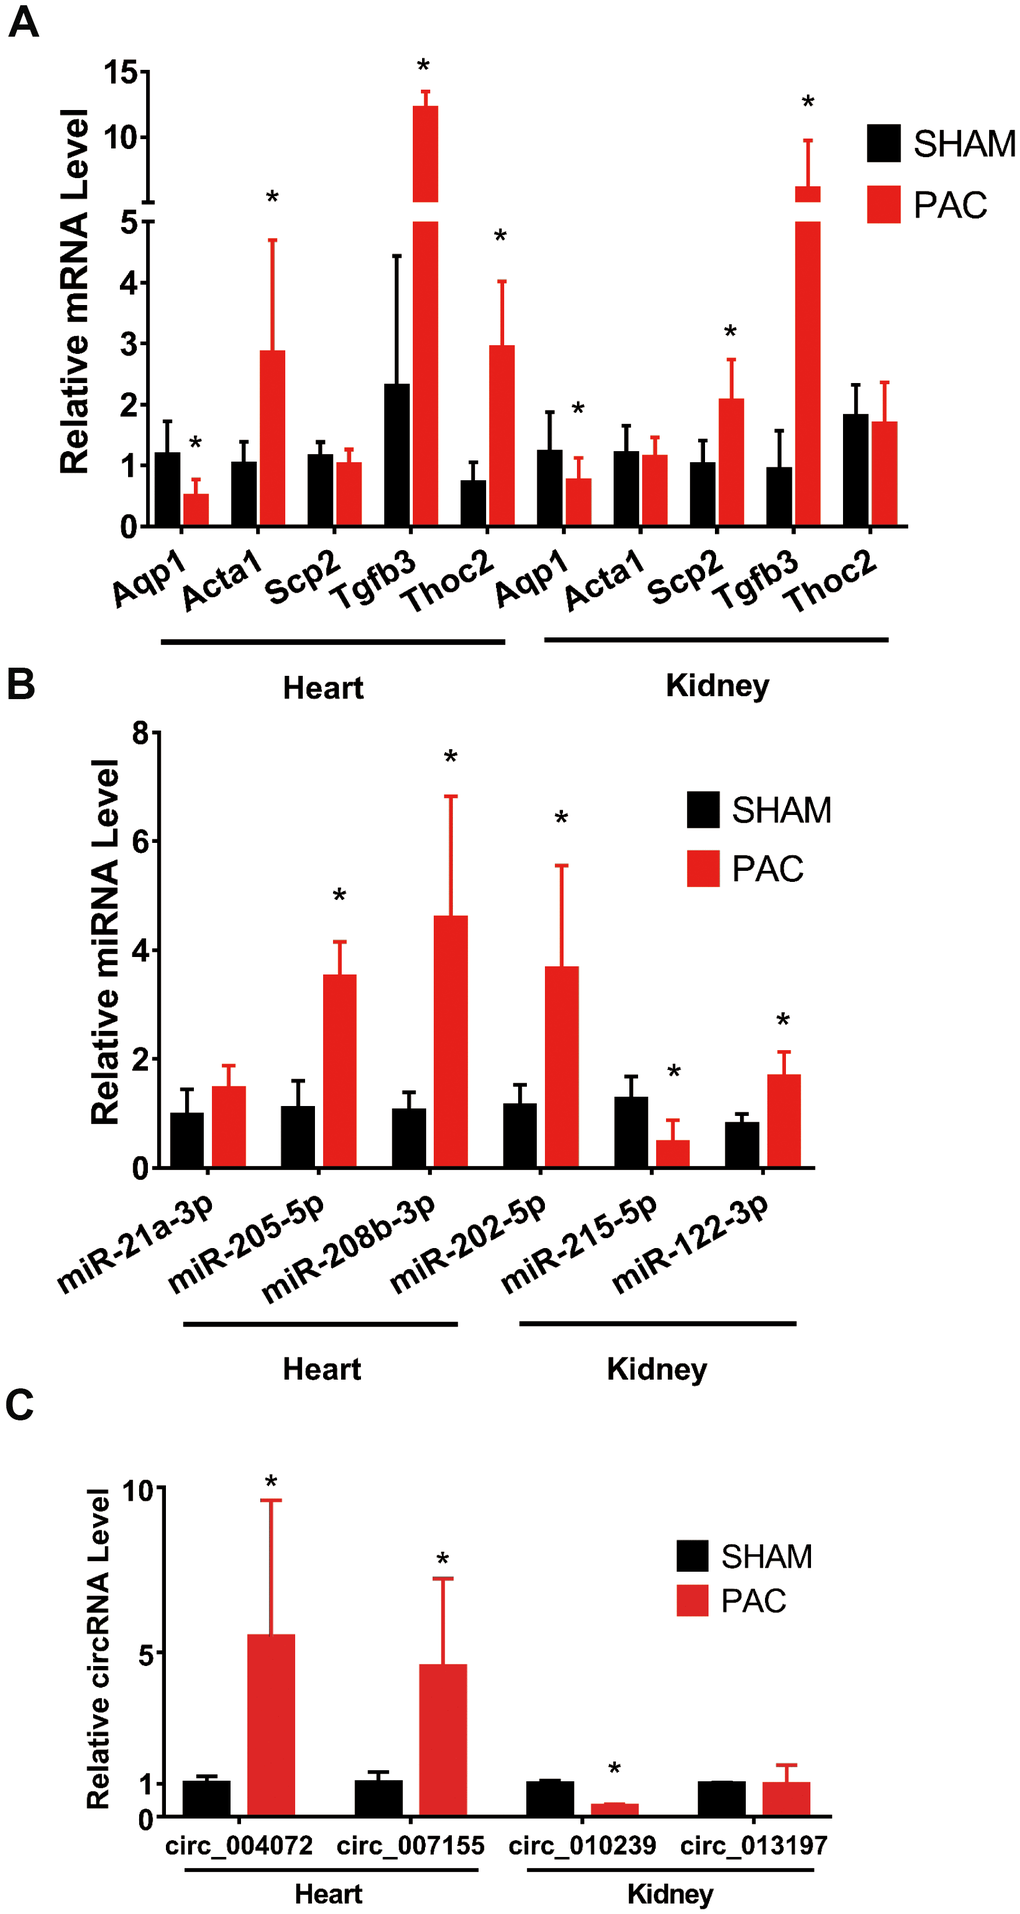 Validation of mRNAs and noncoding RNAs in the right ventricle and kidney. (A) qRT-PCR validation of selected mRNAs between the sham and PAC groups. (B) qRT-PCR validation of selected miRNAs between the sham and PAC groups. (C) Validation of circRNAs between the sham and PAC groups; n = 5 in each group. *P 